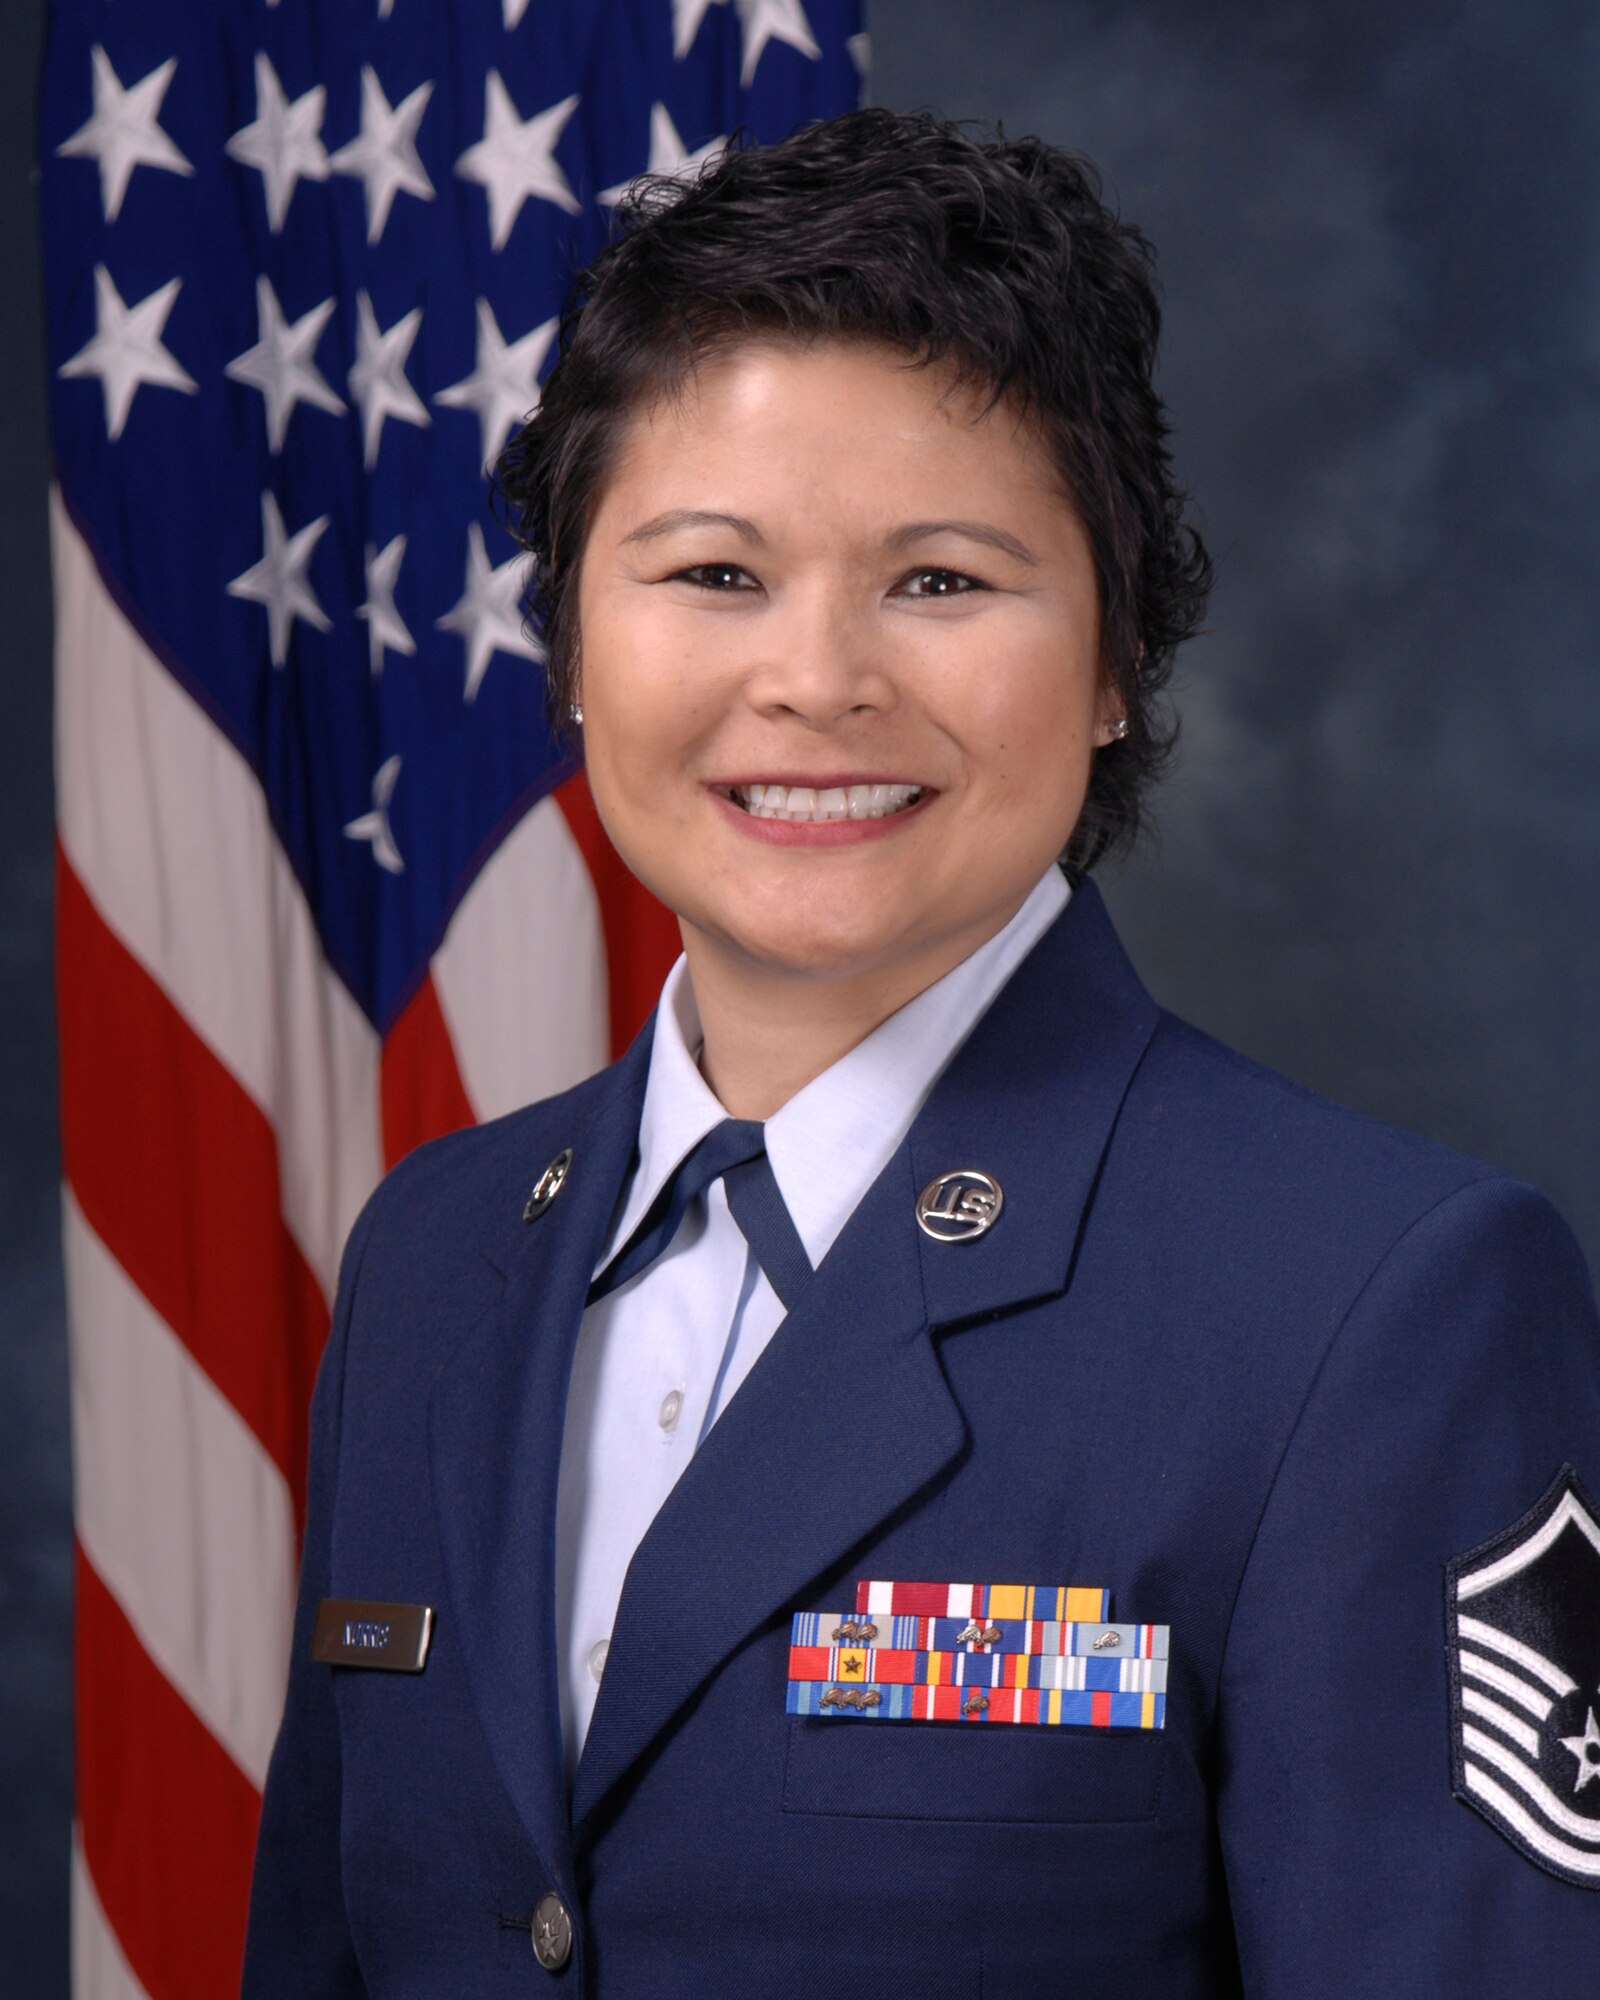 OFFUTT AIR FORCE BASE, Neb. -- Master Sgt. Anne Marie M. Norris, from Tyndall AFB, Fla., is one of 29 Airmen nominated for awards who will attend the 2010 Air Combat Command Outstanding Airmen of the Year Awards Banquet in Omaha, Neb., April 21. Sergeant Norris is nominated for the SNCO of the Year Award. U.S. Air Force courtesy photo